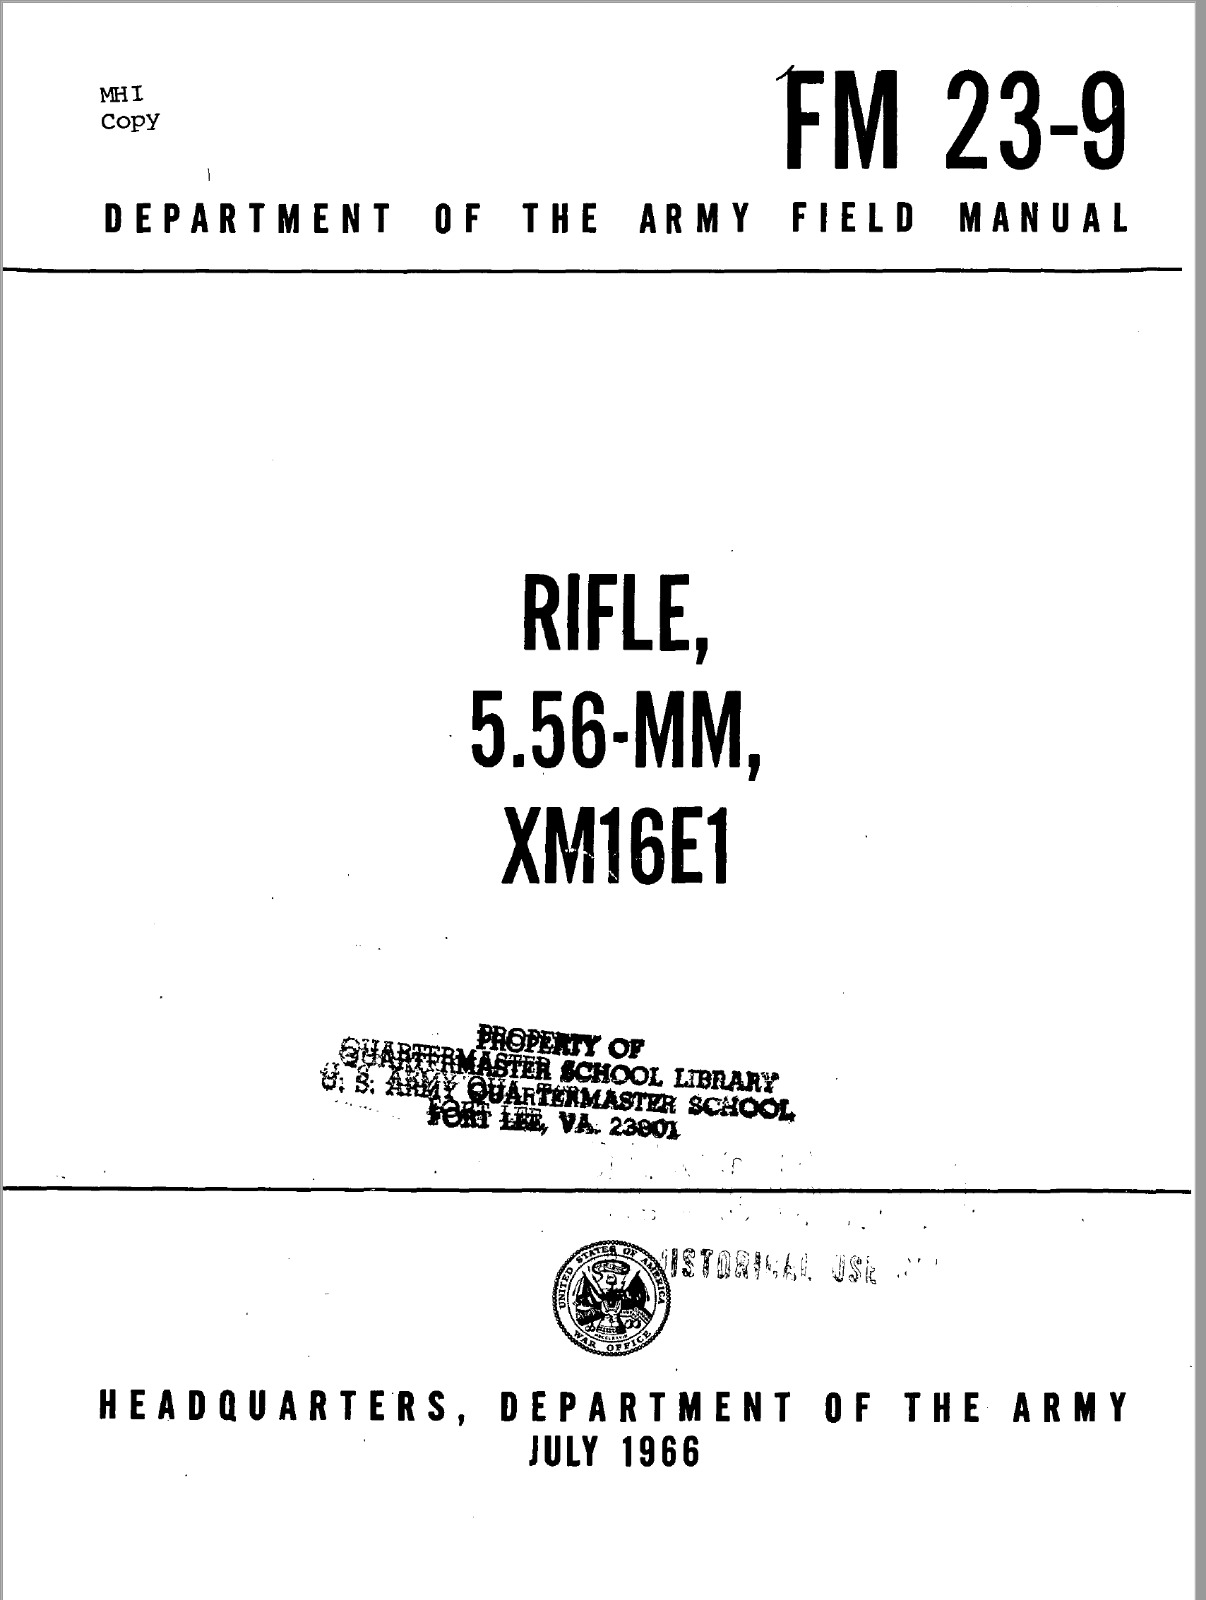 81 Page 1966 1968 c1 5.56 mm XM16E1 M16A1 FM 23-9 Manual on CD